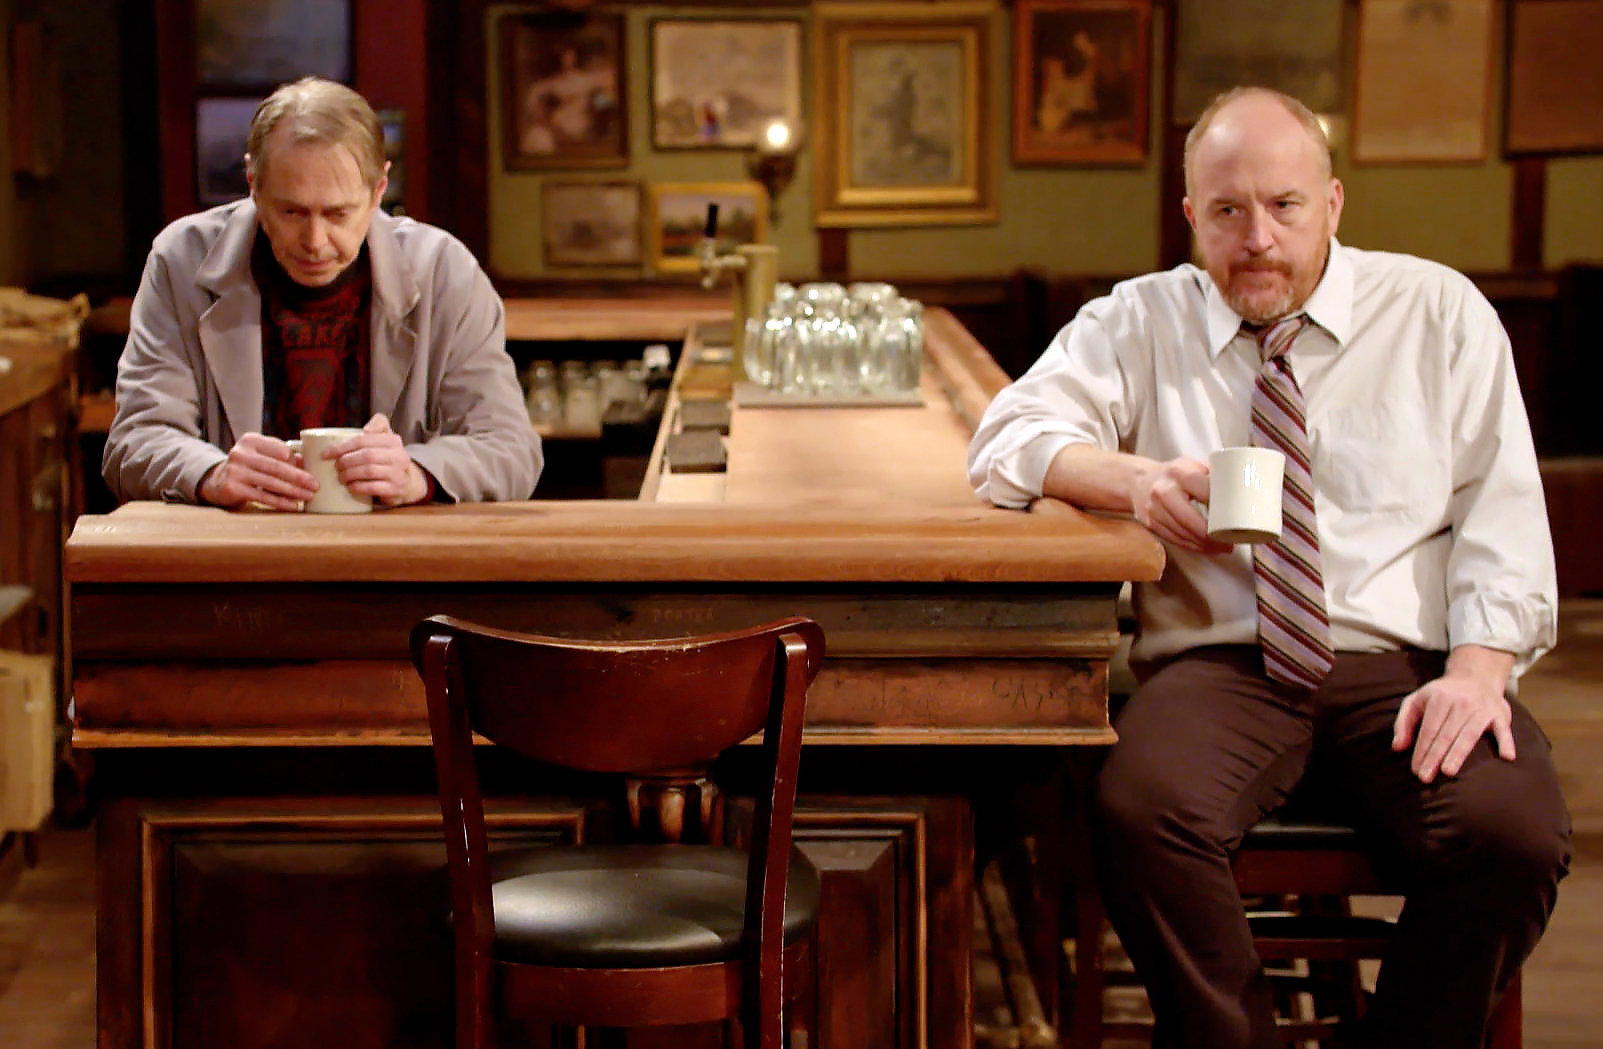 horace_and_pete